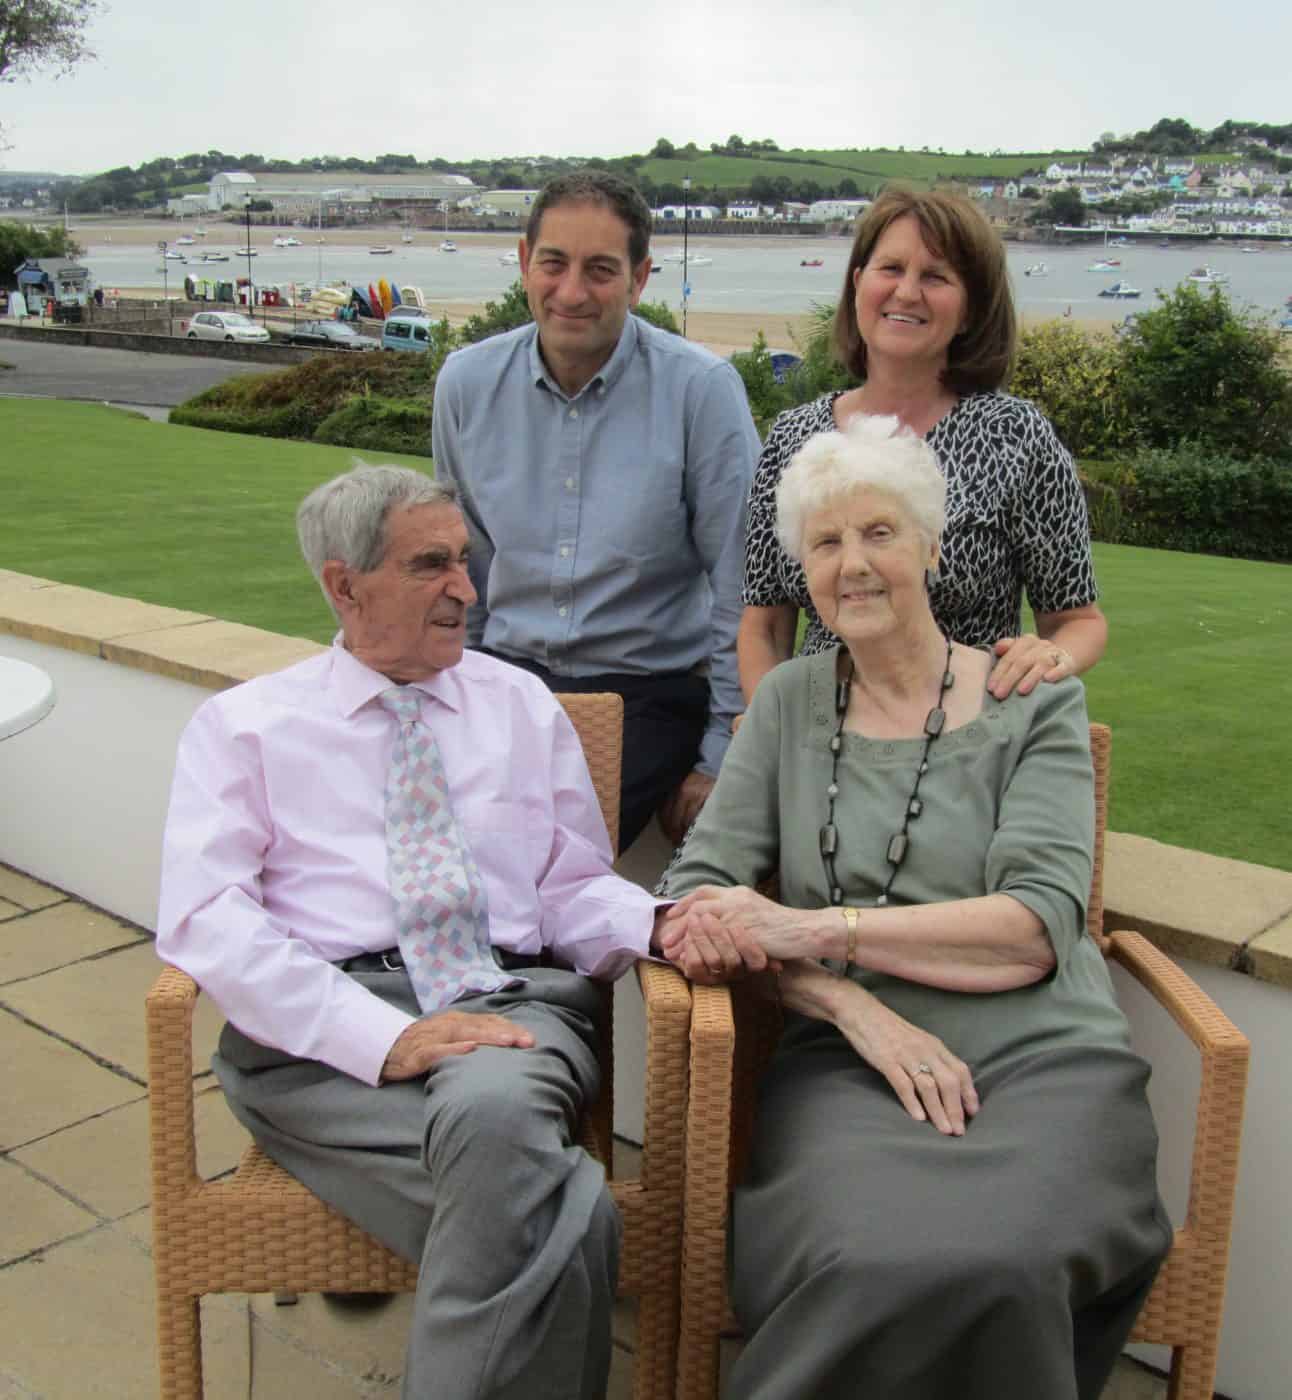 Annette Chidgey (back right) with her brother, Simon-Chidgey (back left) and their parents David and Shirley Chidgey